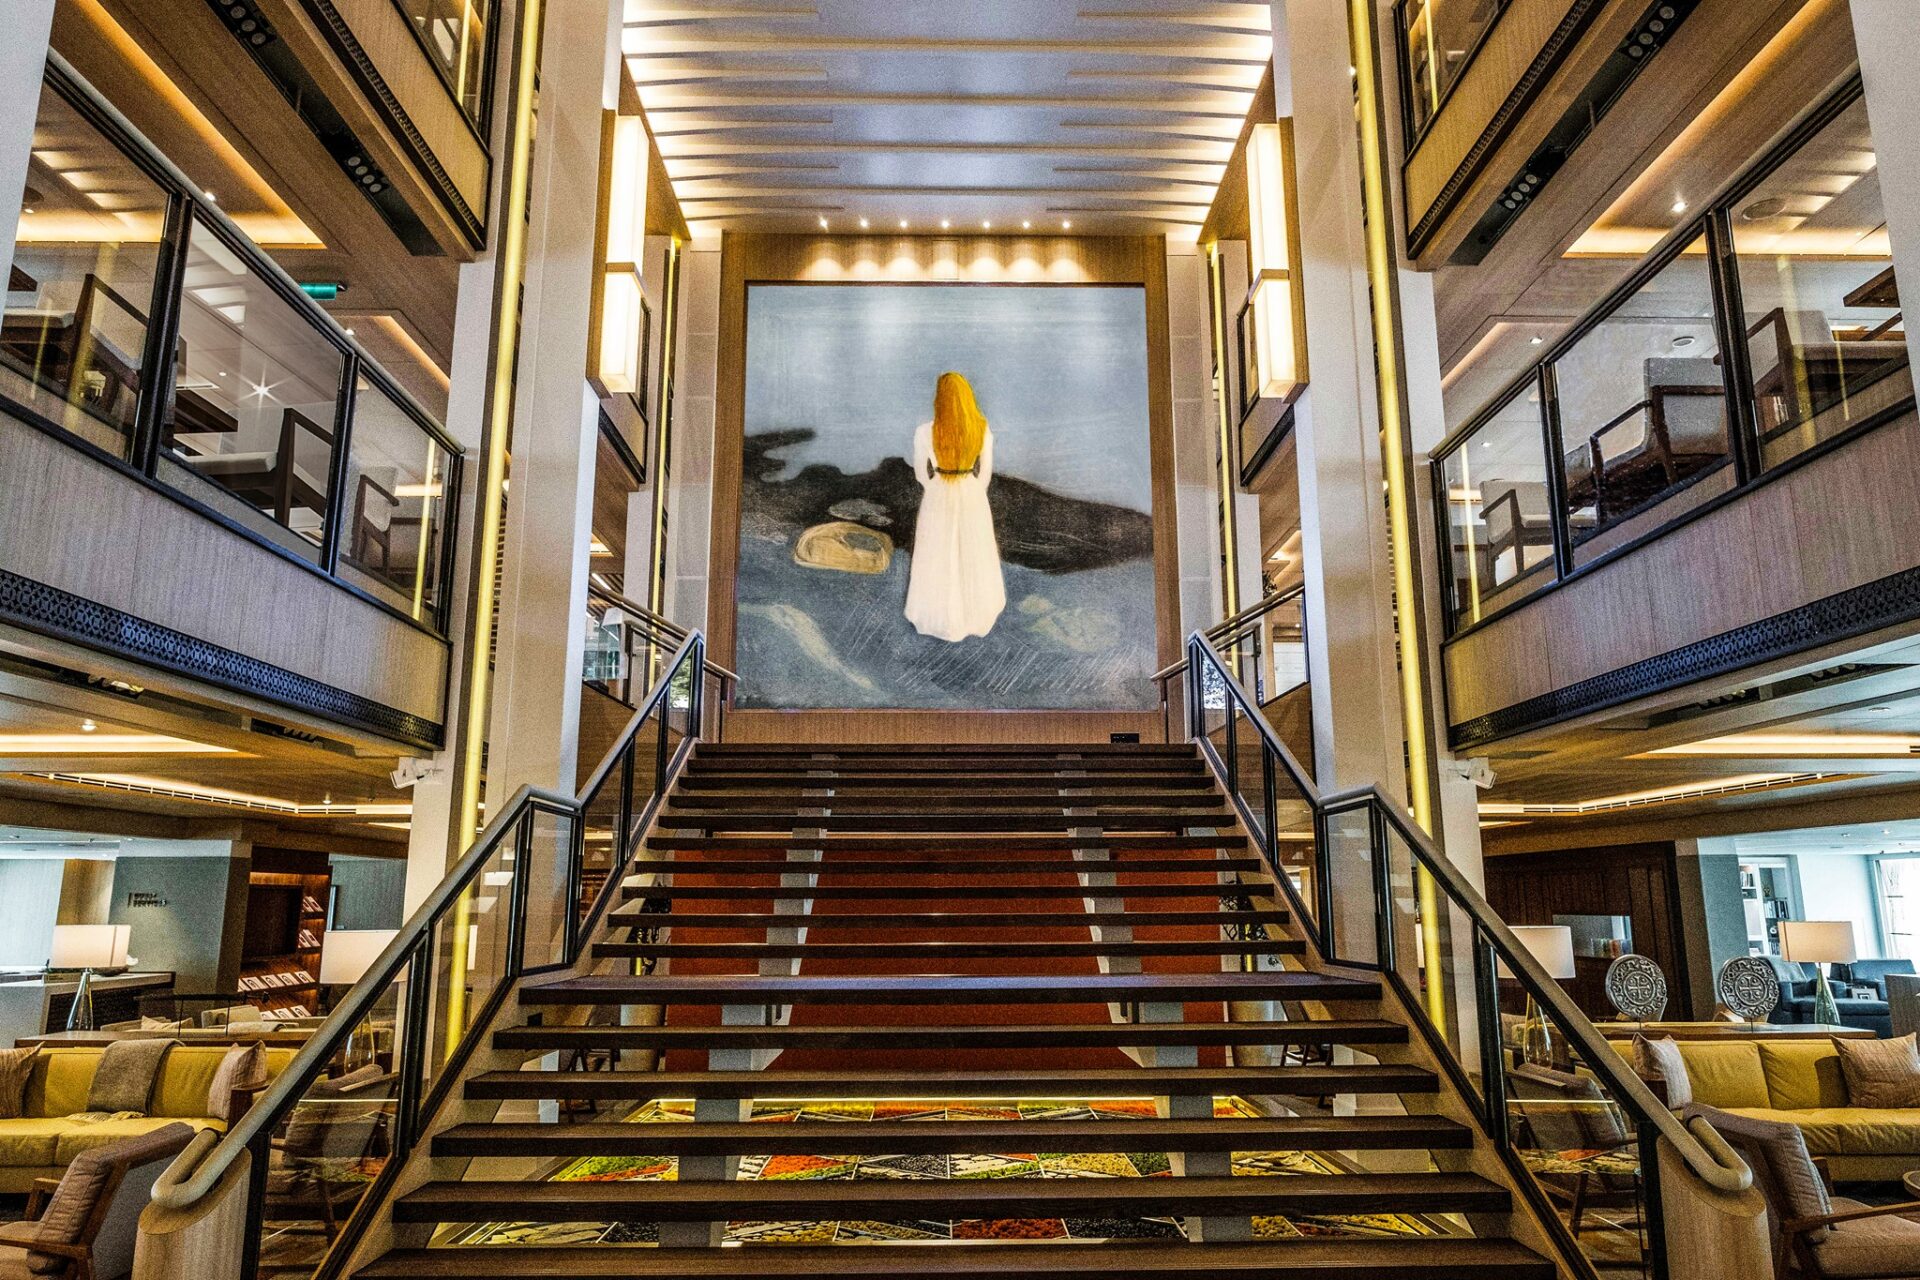 UK cruises are the perfect luxury holiday option. Here, a tasteful piece of artwork showing a woman walking away sits at the top of a grand staircase.